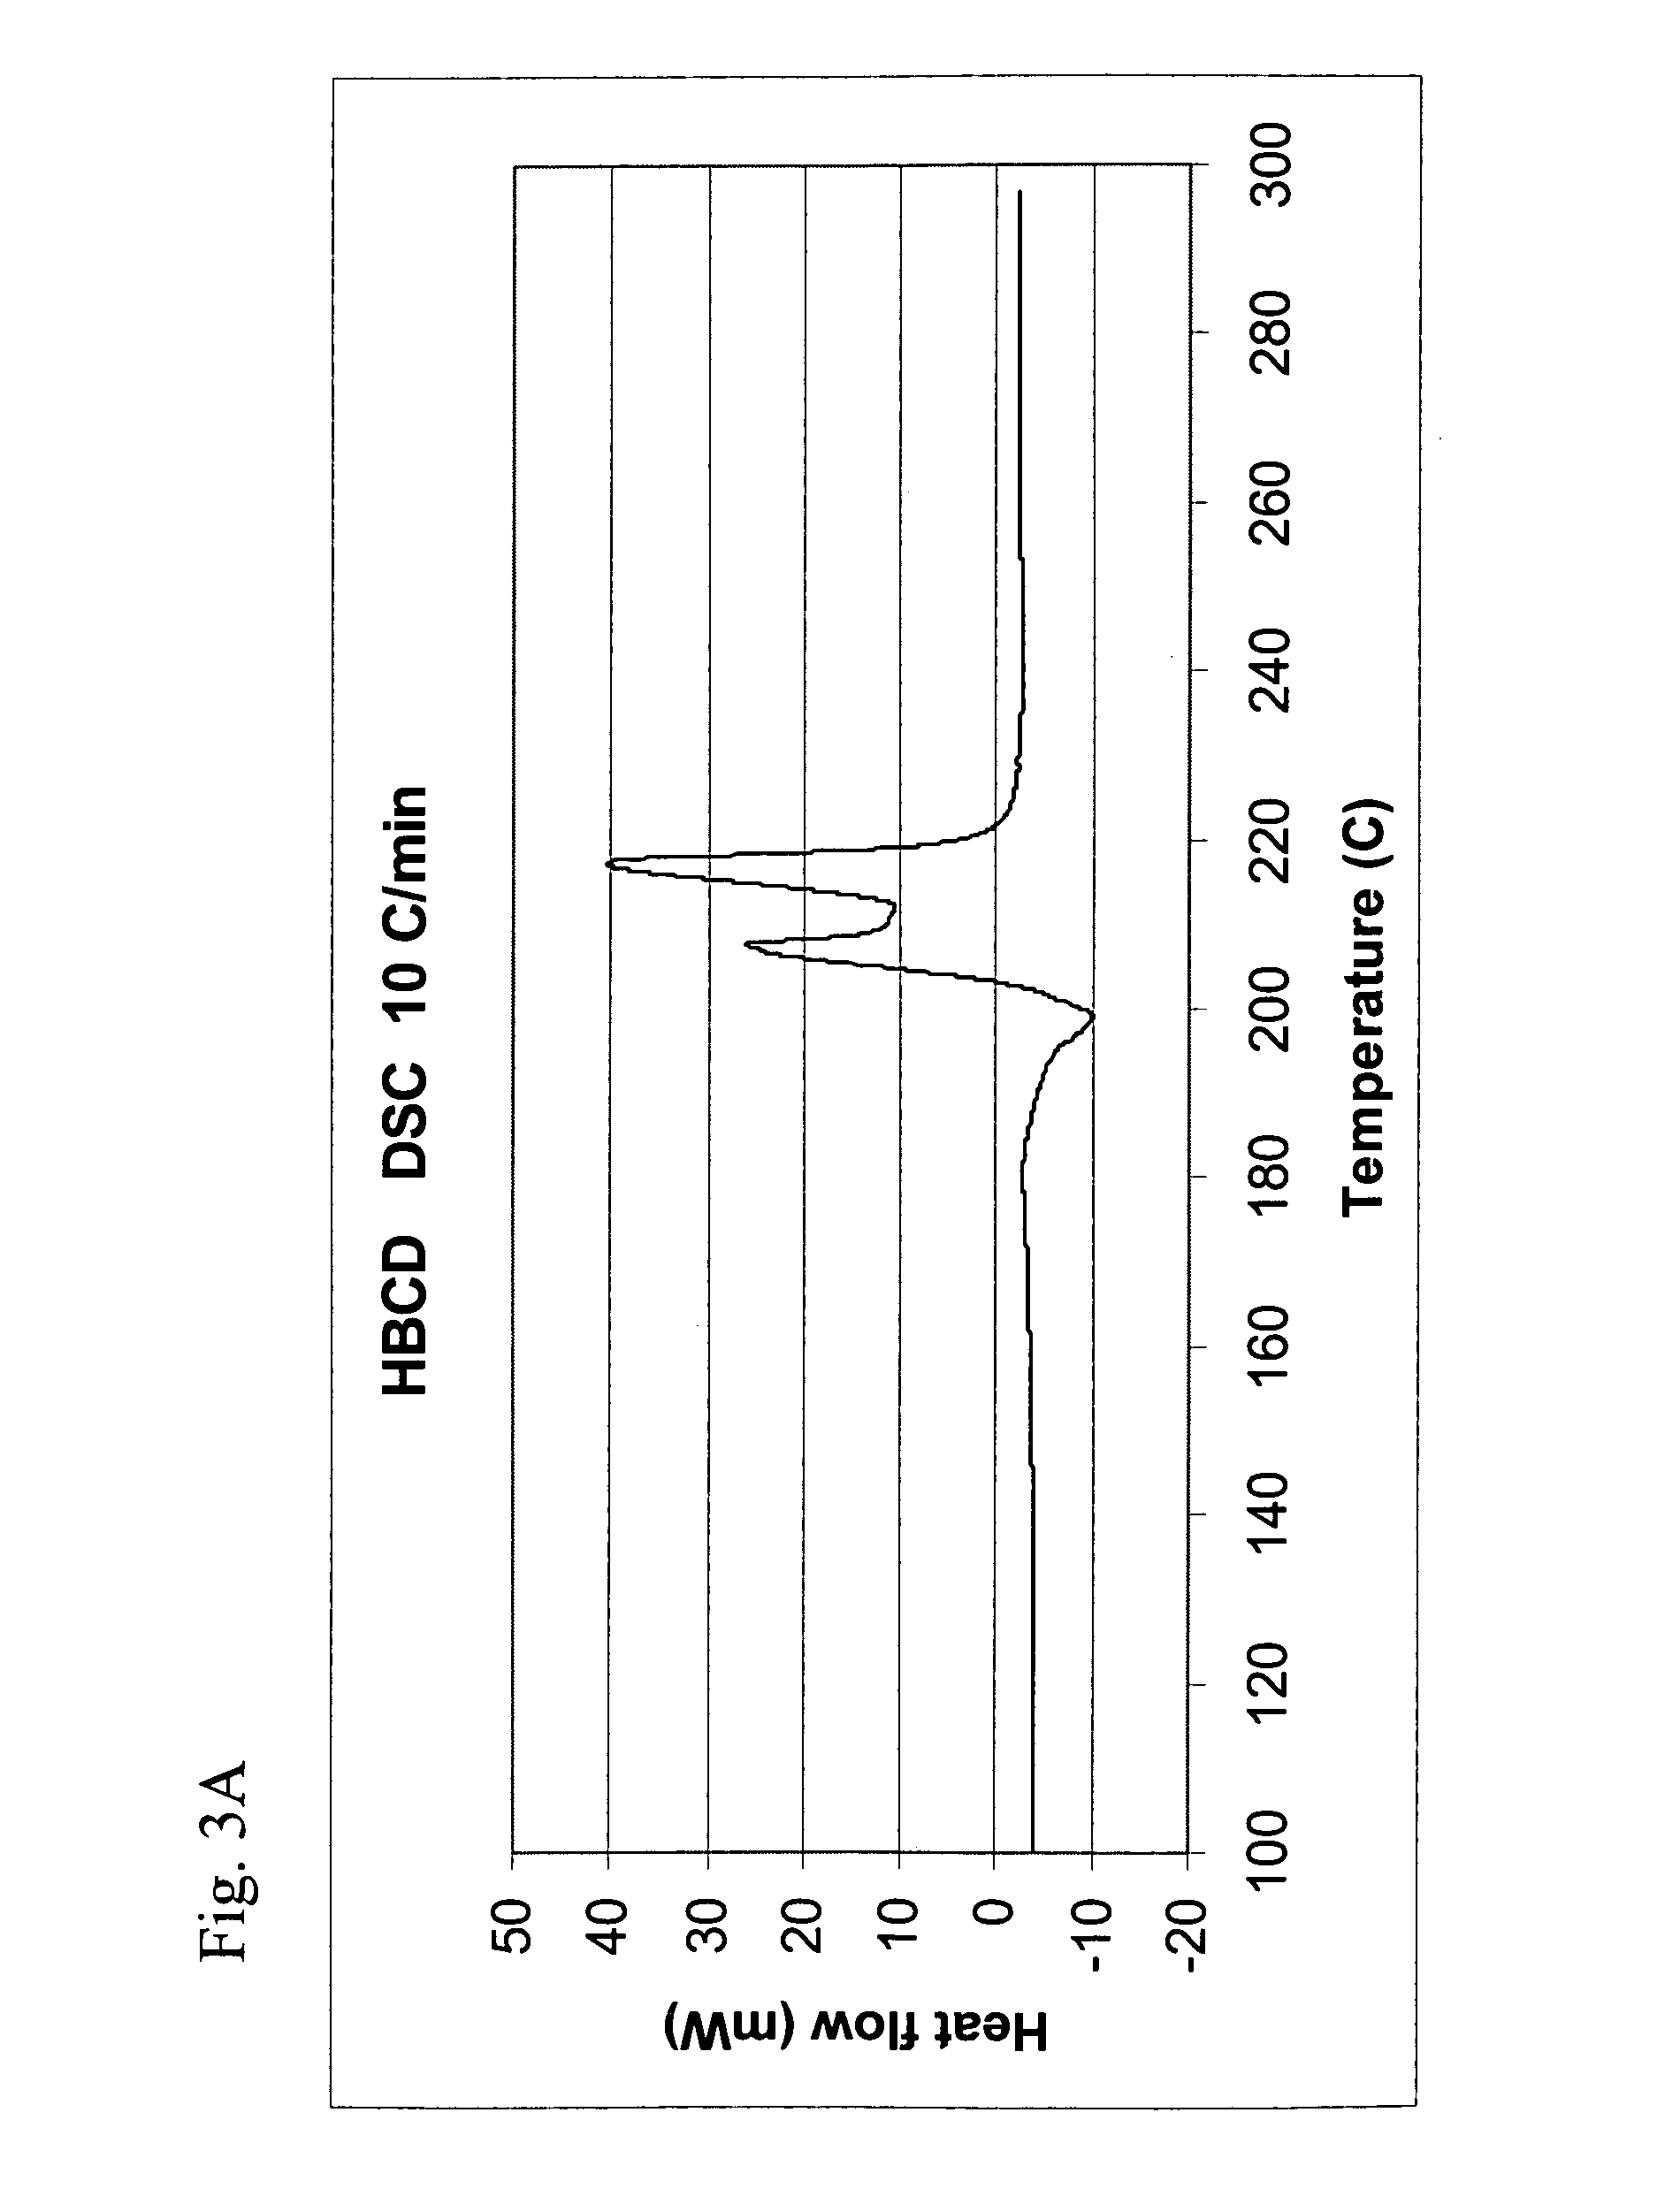 Multi-functional microencapsulated additives for polymeric compositions